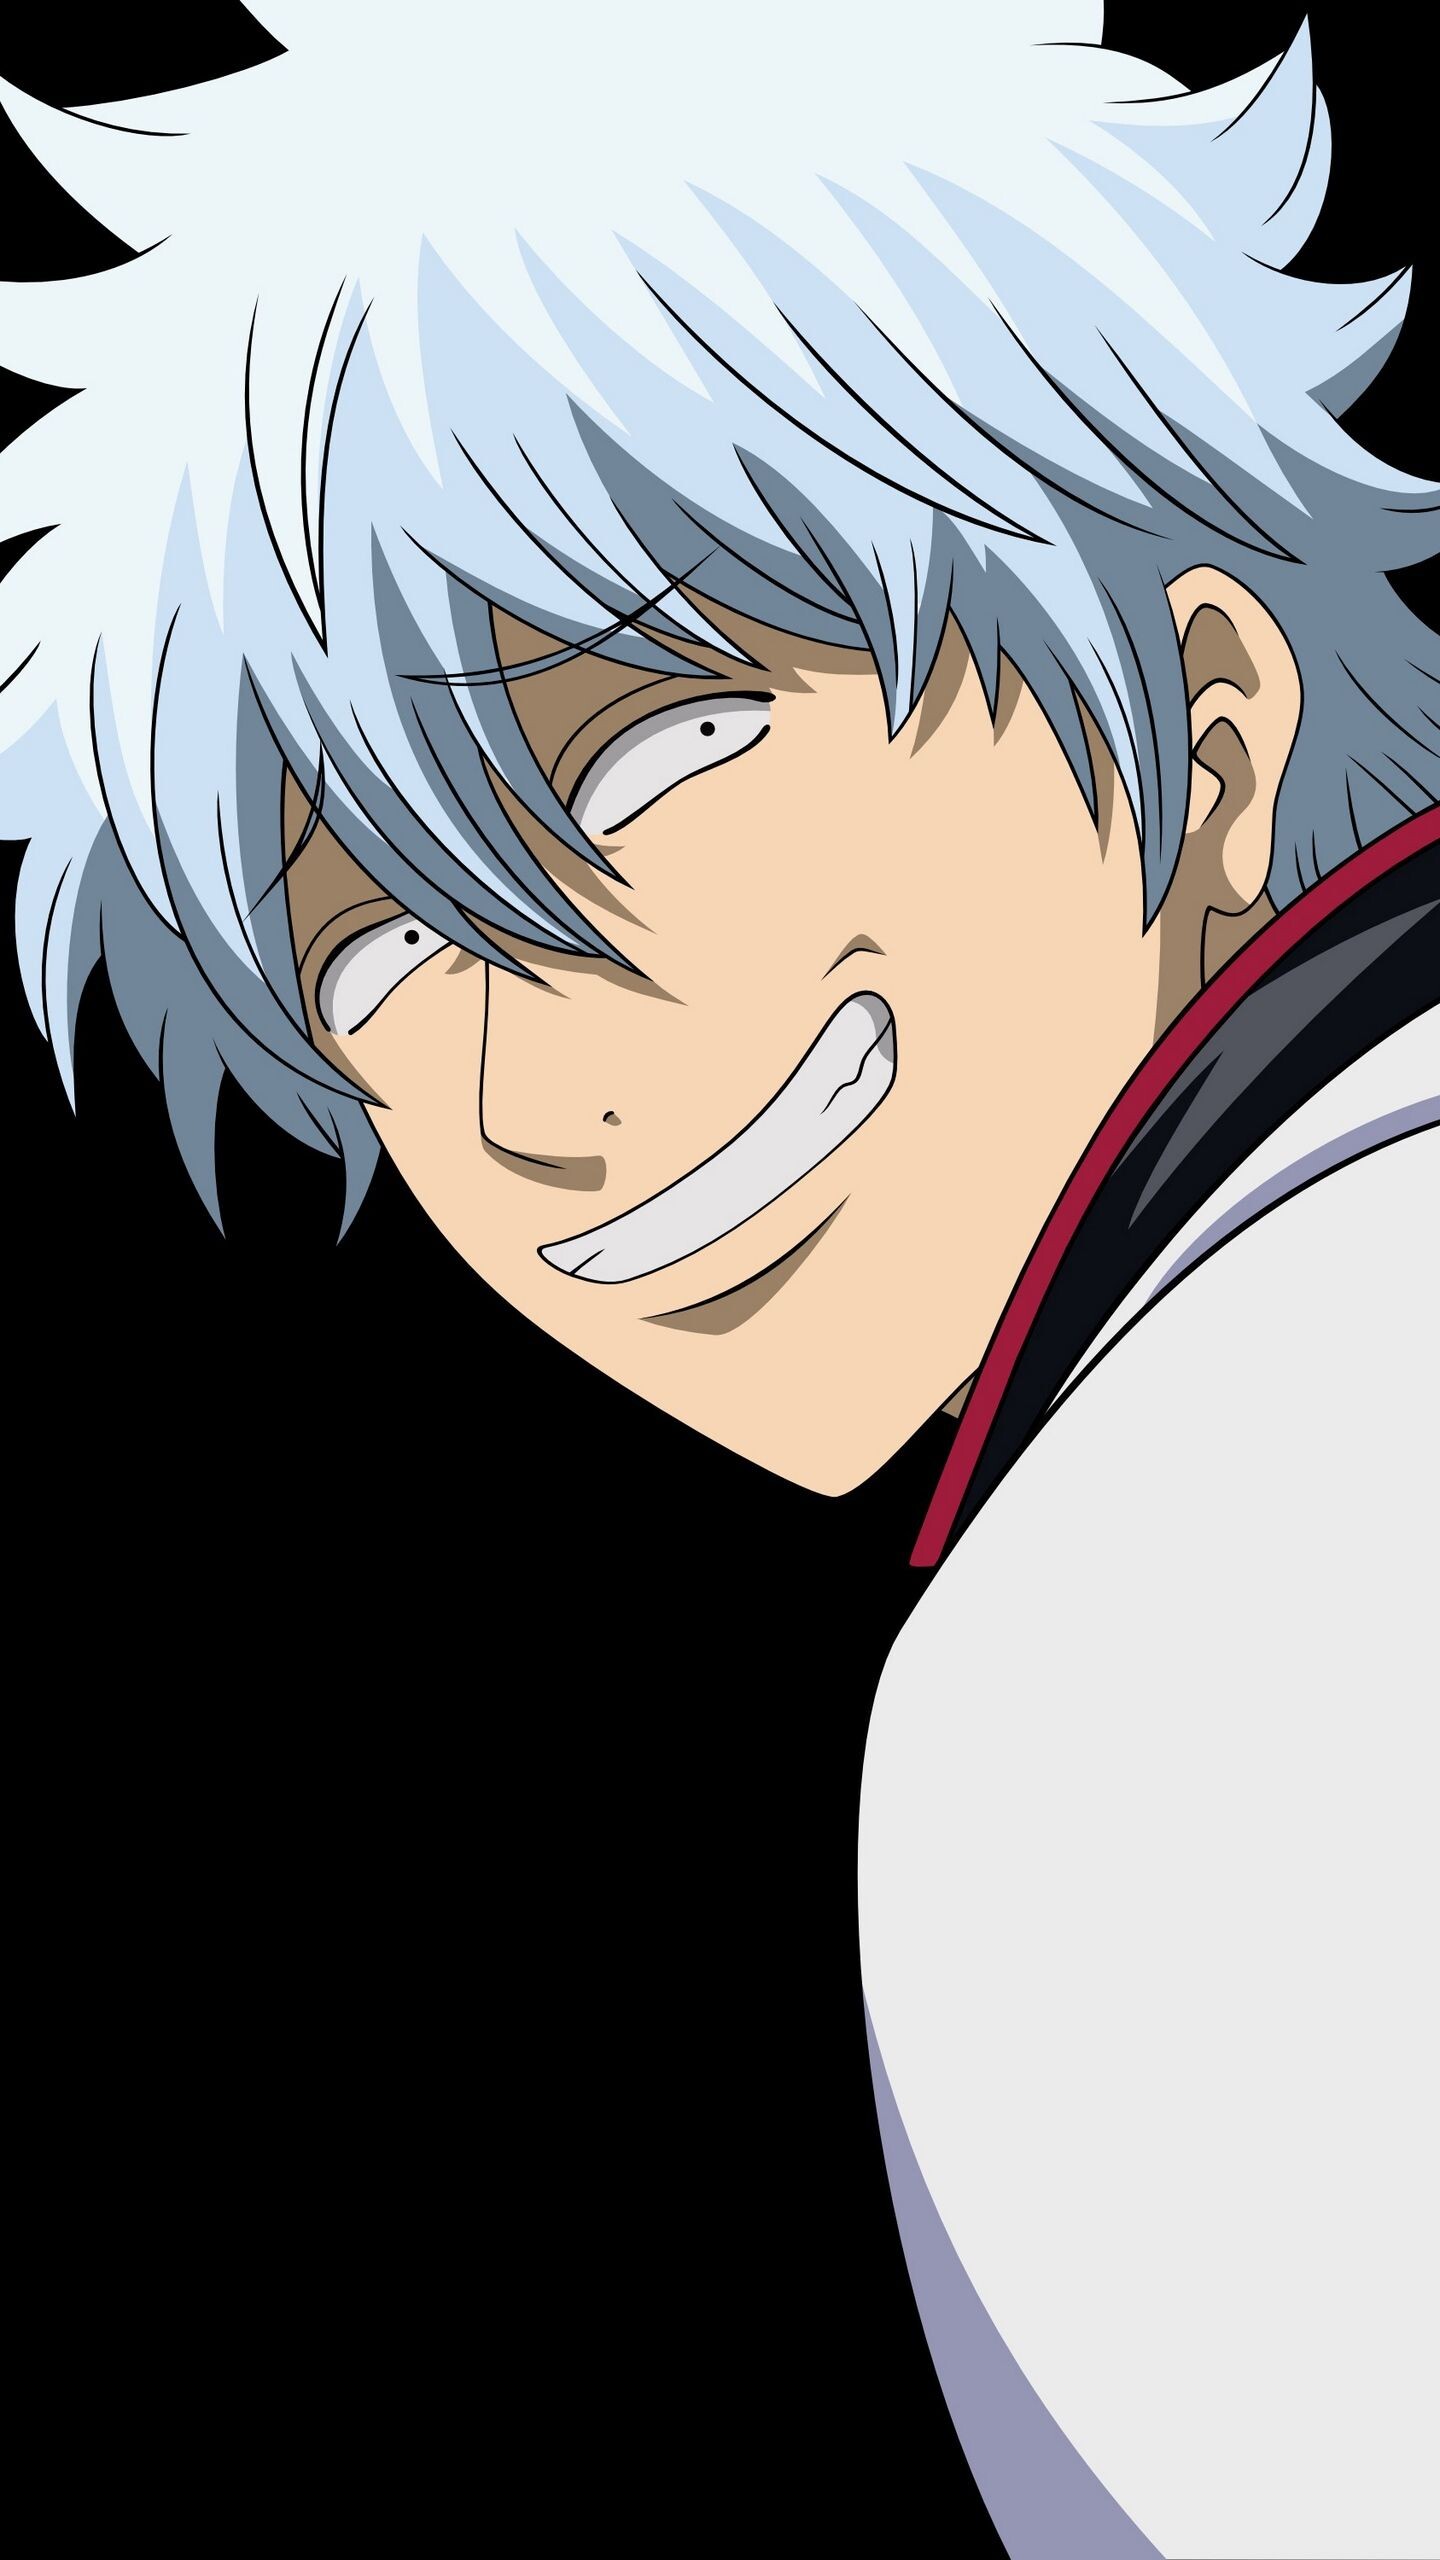 Gintama (TV Series): Gintoki Sakata, Obsessed with sweet food such as parfaits, ice cream and cakes, Manga character. 1440x2560 HD Wallpaper.